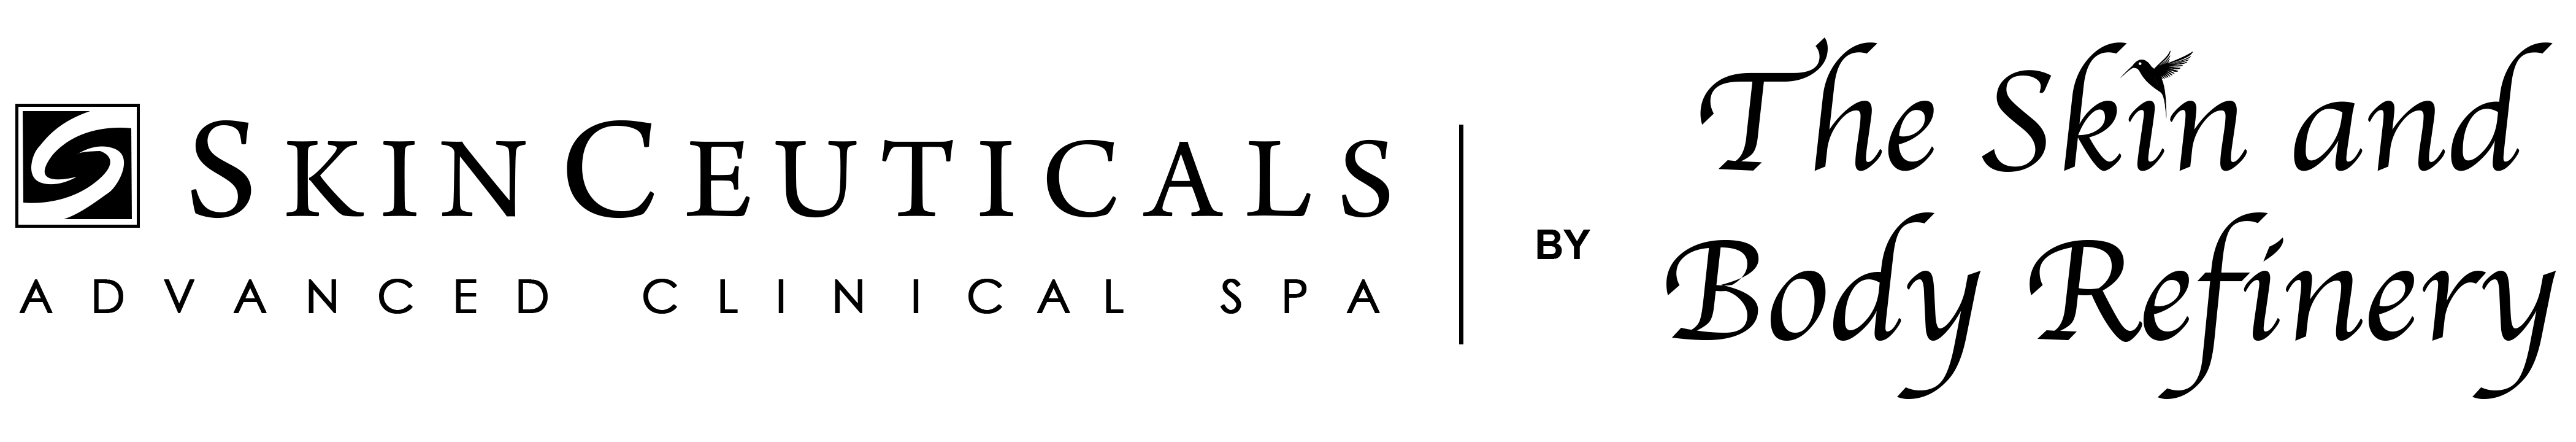 SkinCeuticals Logo - SkinCeuticals Advanced Clinical Spa - The Skin And Body Refinery ...